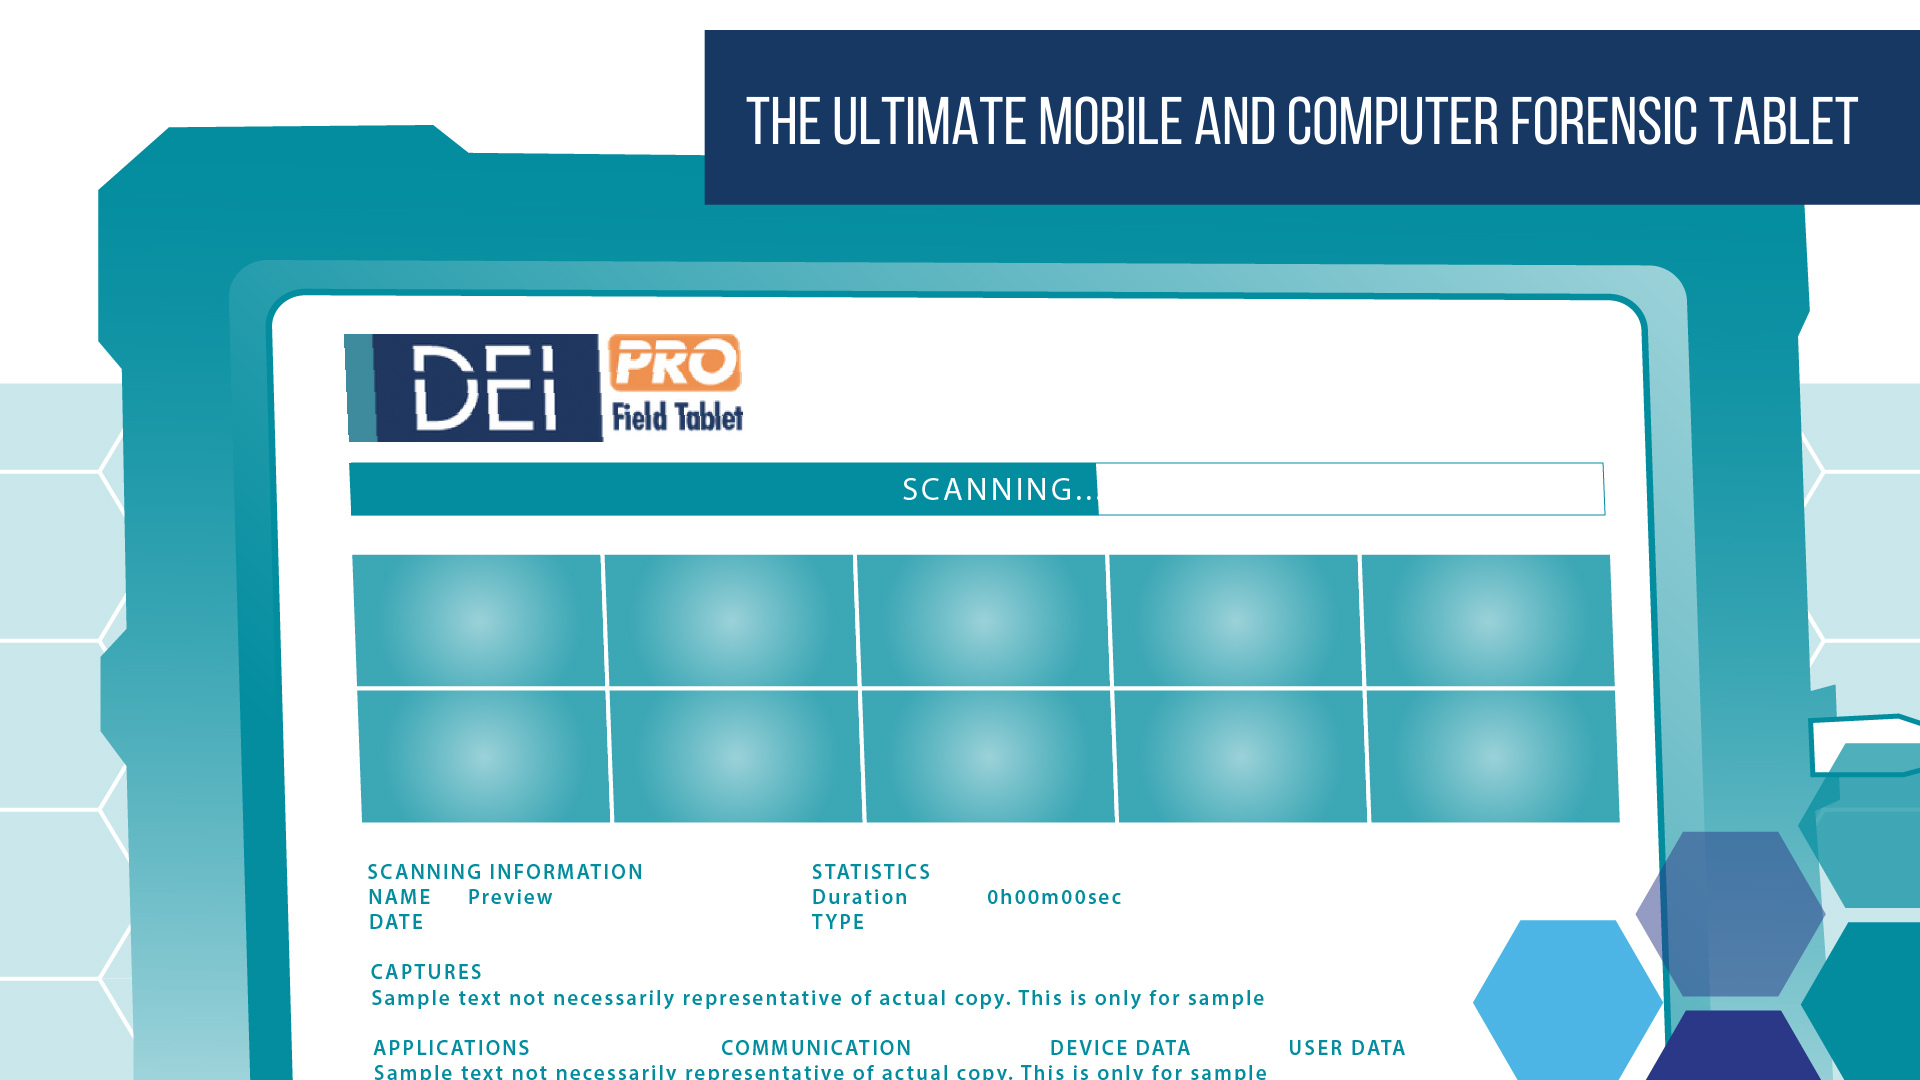 The best mobile and computer forensic tablet - DEI PRO Field Tablet